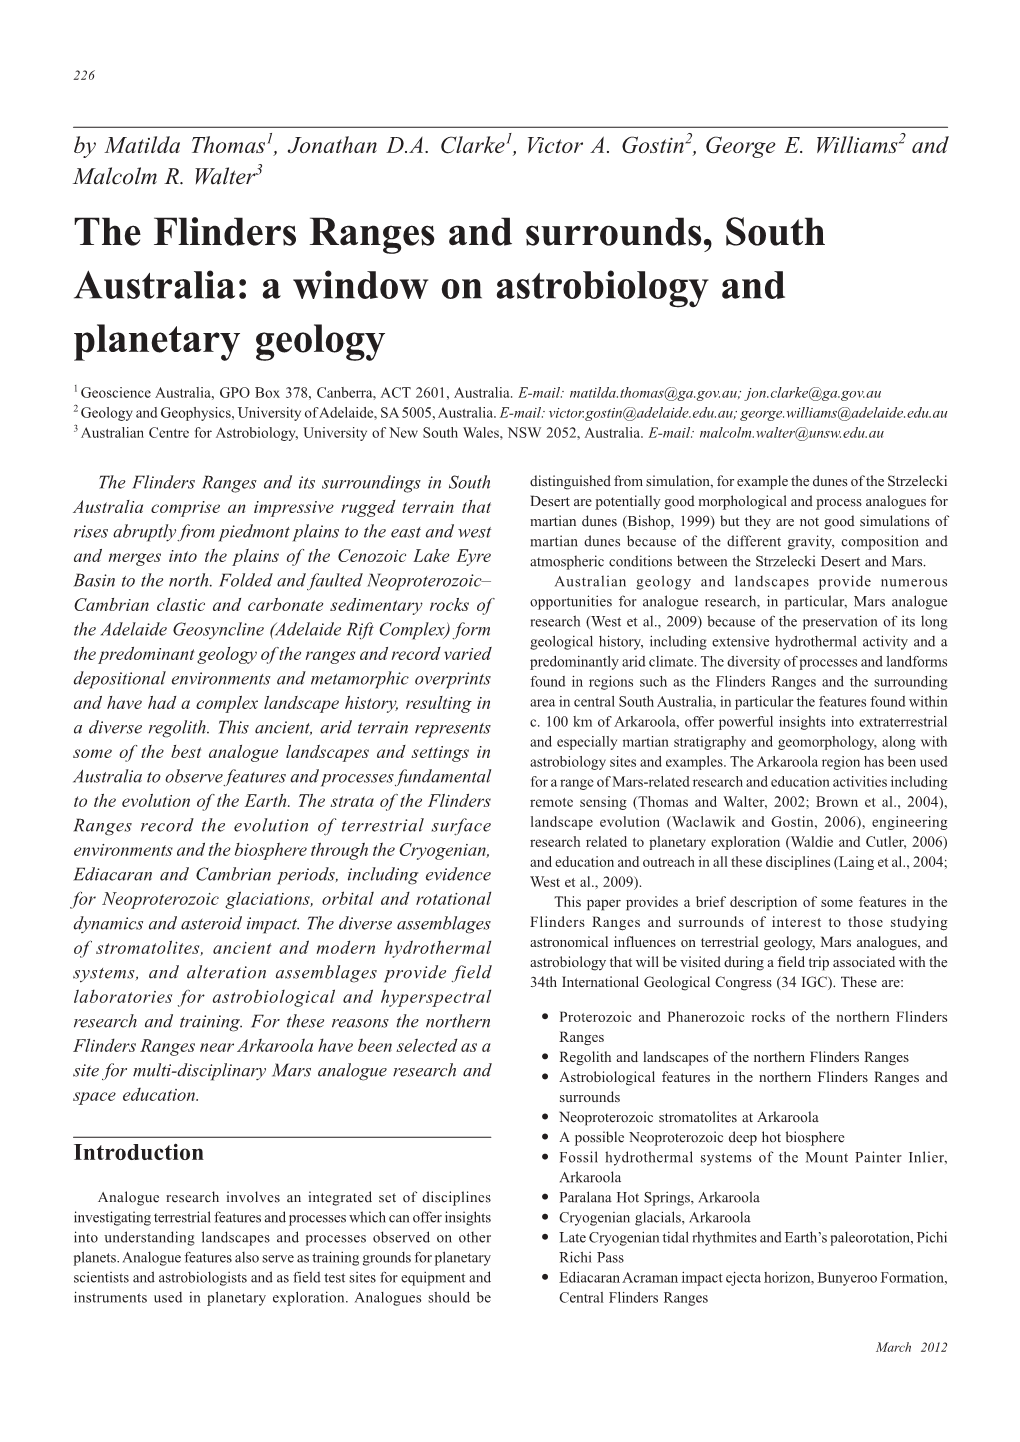 The Flinders Ranges and Surrounds, South Australia: a Window on Astrobiology and Planetary Geology